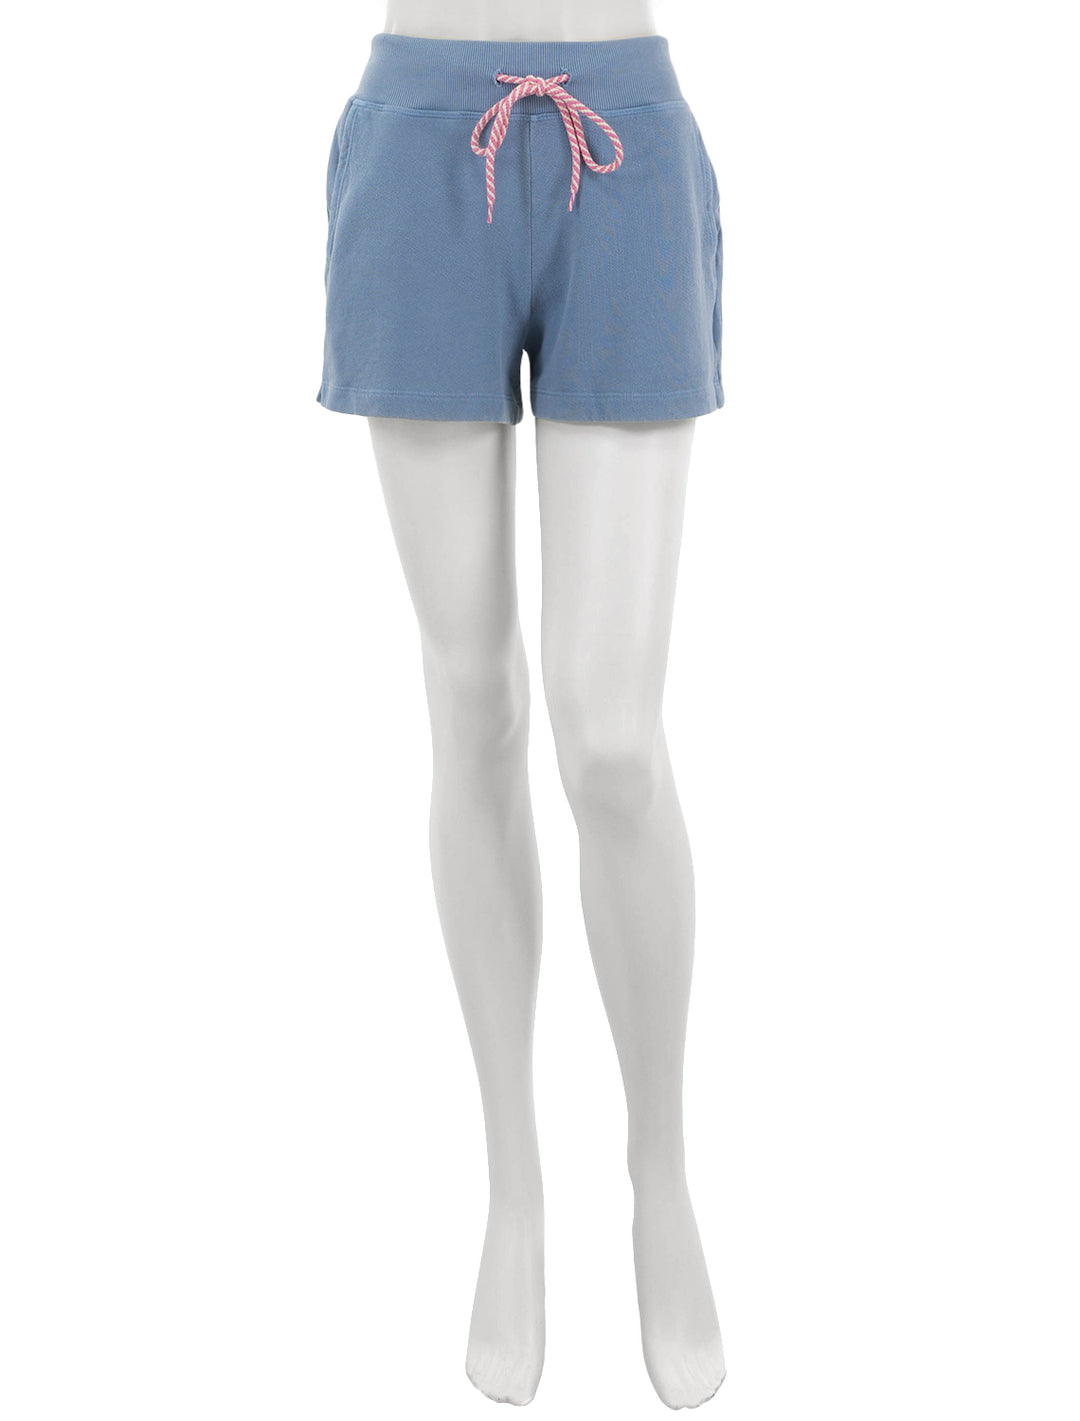 Front view of Sundry's gym shorts with contrast cord in pigment capri.